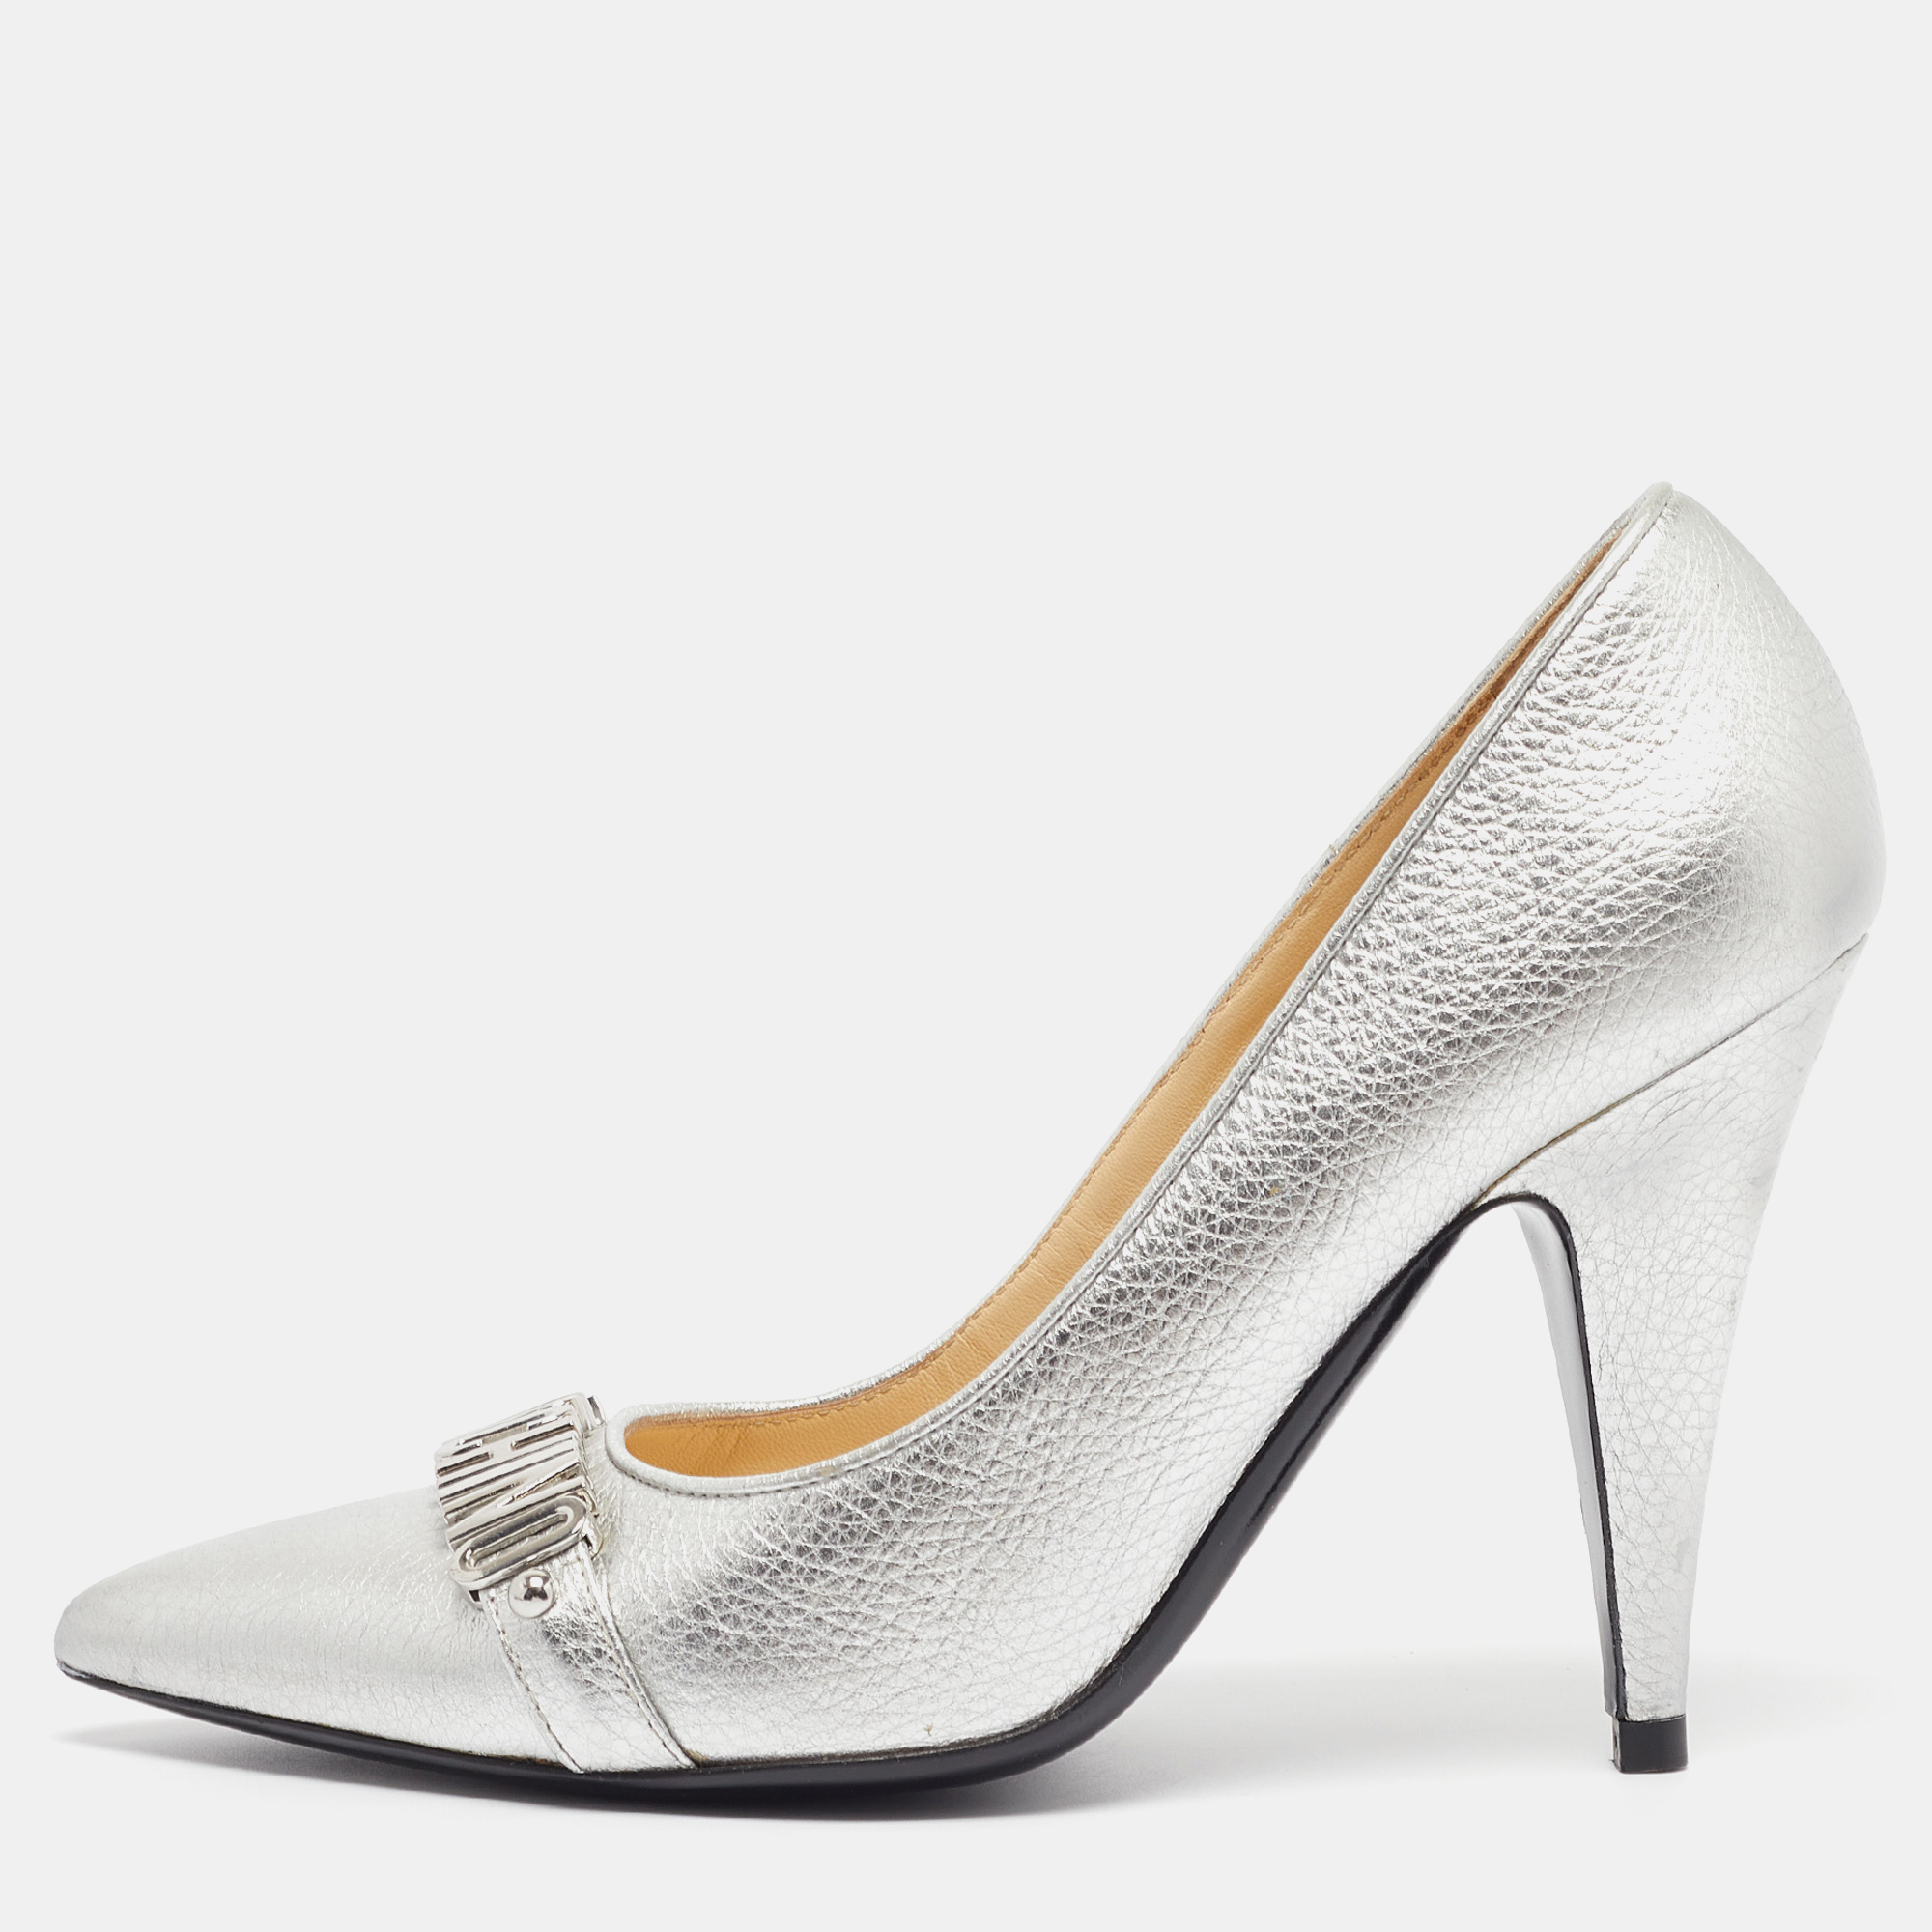 Moschino silver leather classic logo pumps size 40